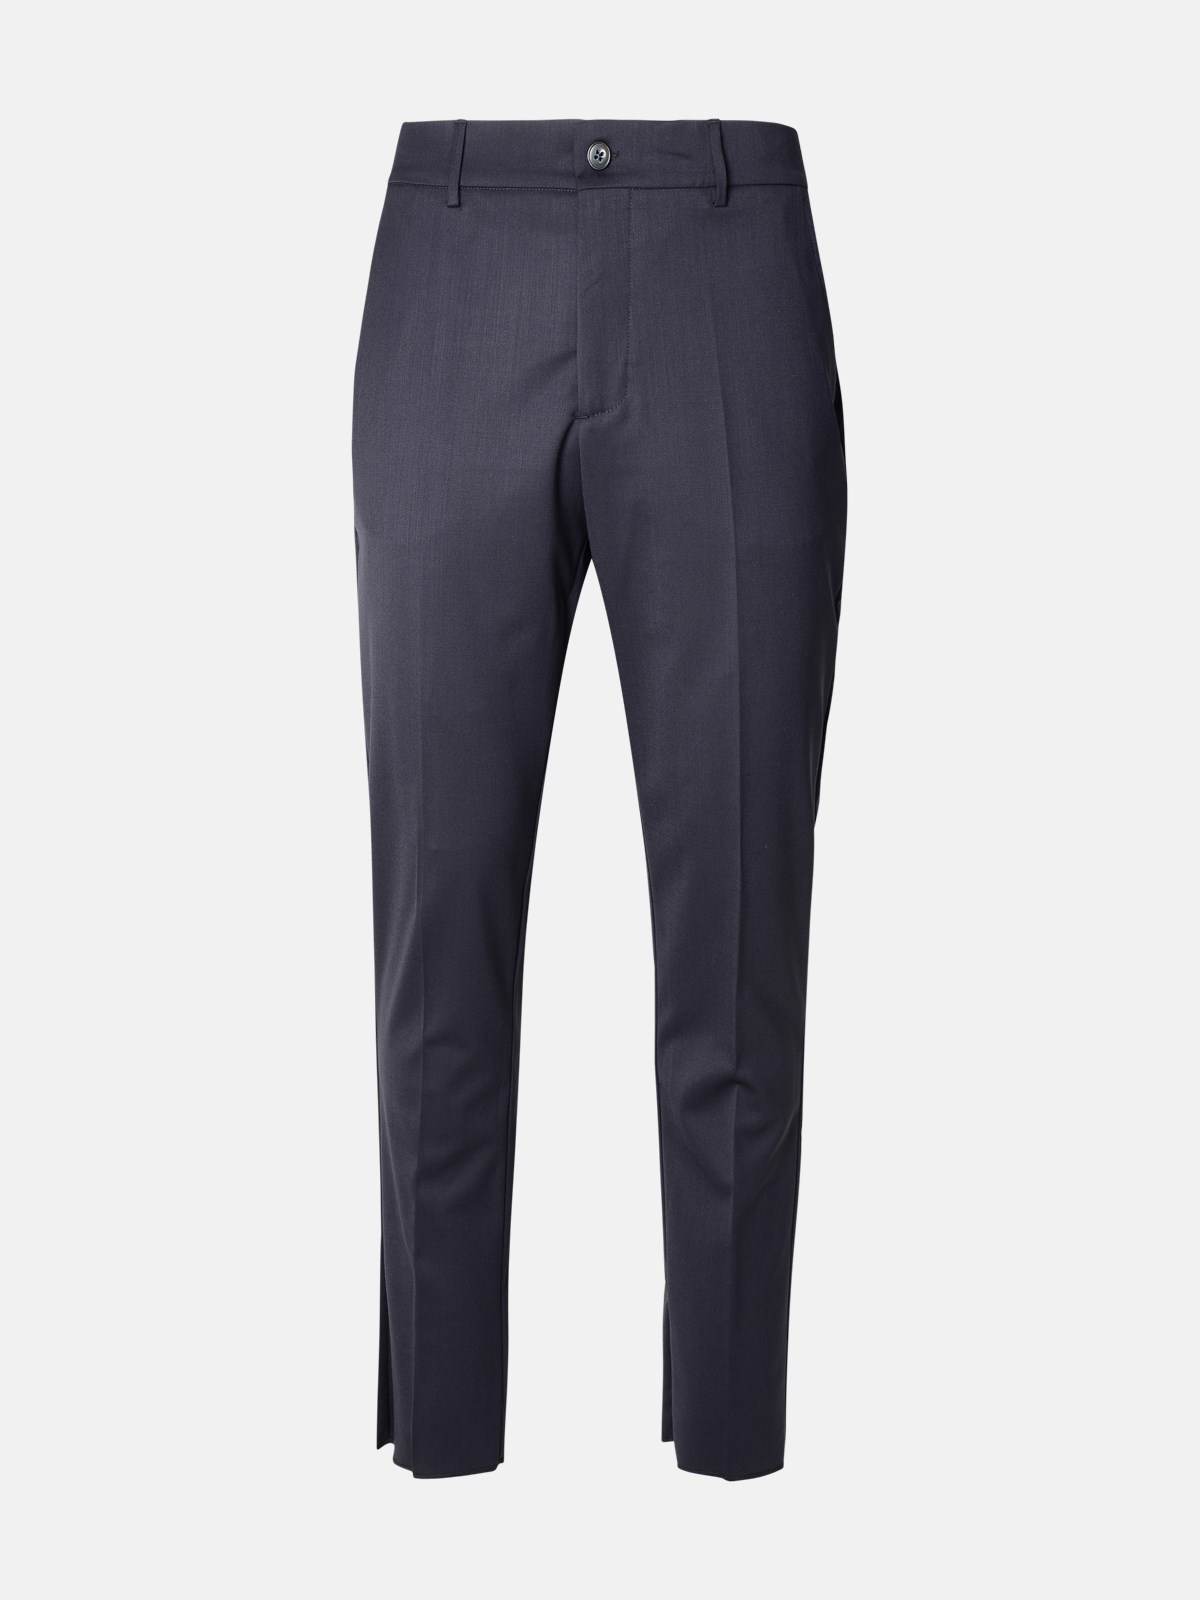 Shop Brian Dales Blue Wool Blend Trousers